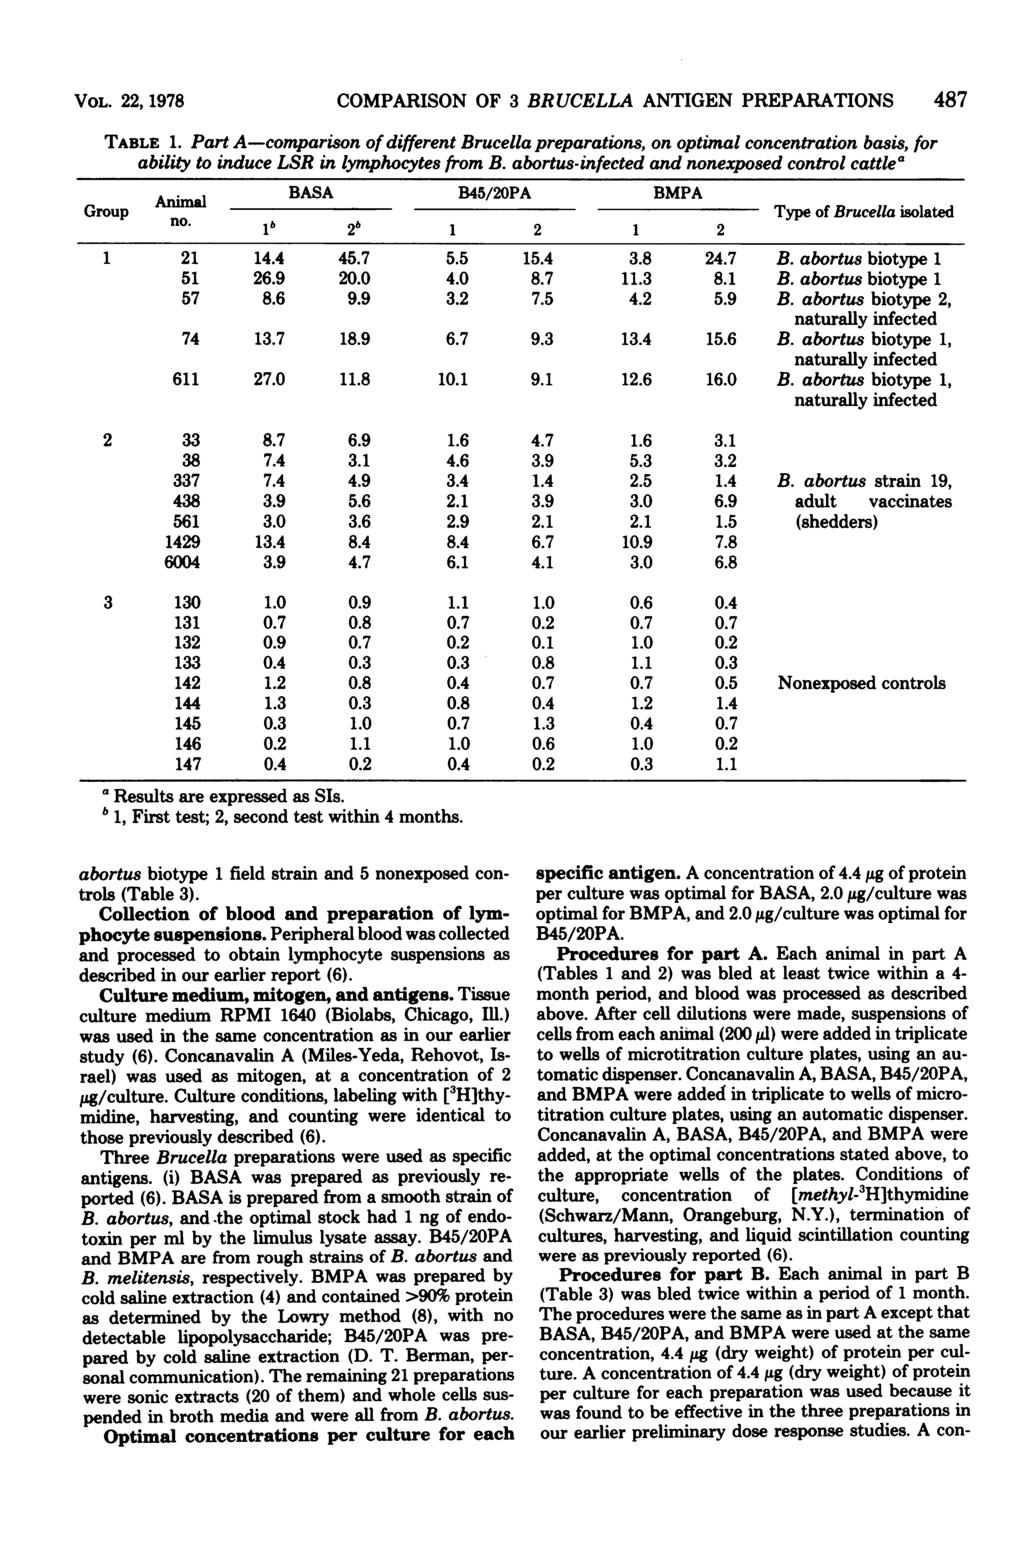 VOL. 22, 1978 COMPARISON OF 3 BRUCELLA ANTIGEN PREPARATIONS 487 TABLE 1. Prt A-comprison of different Brucell preprtions, on optiml concentrtion bsis, for bility to induce LSR in lymphocytes from B.